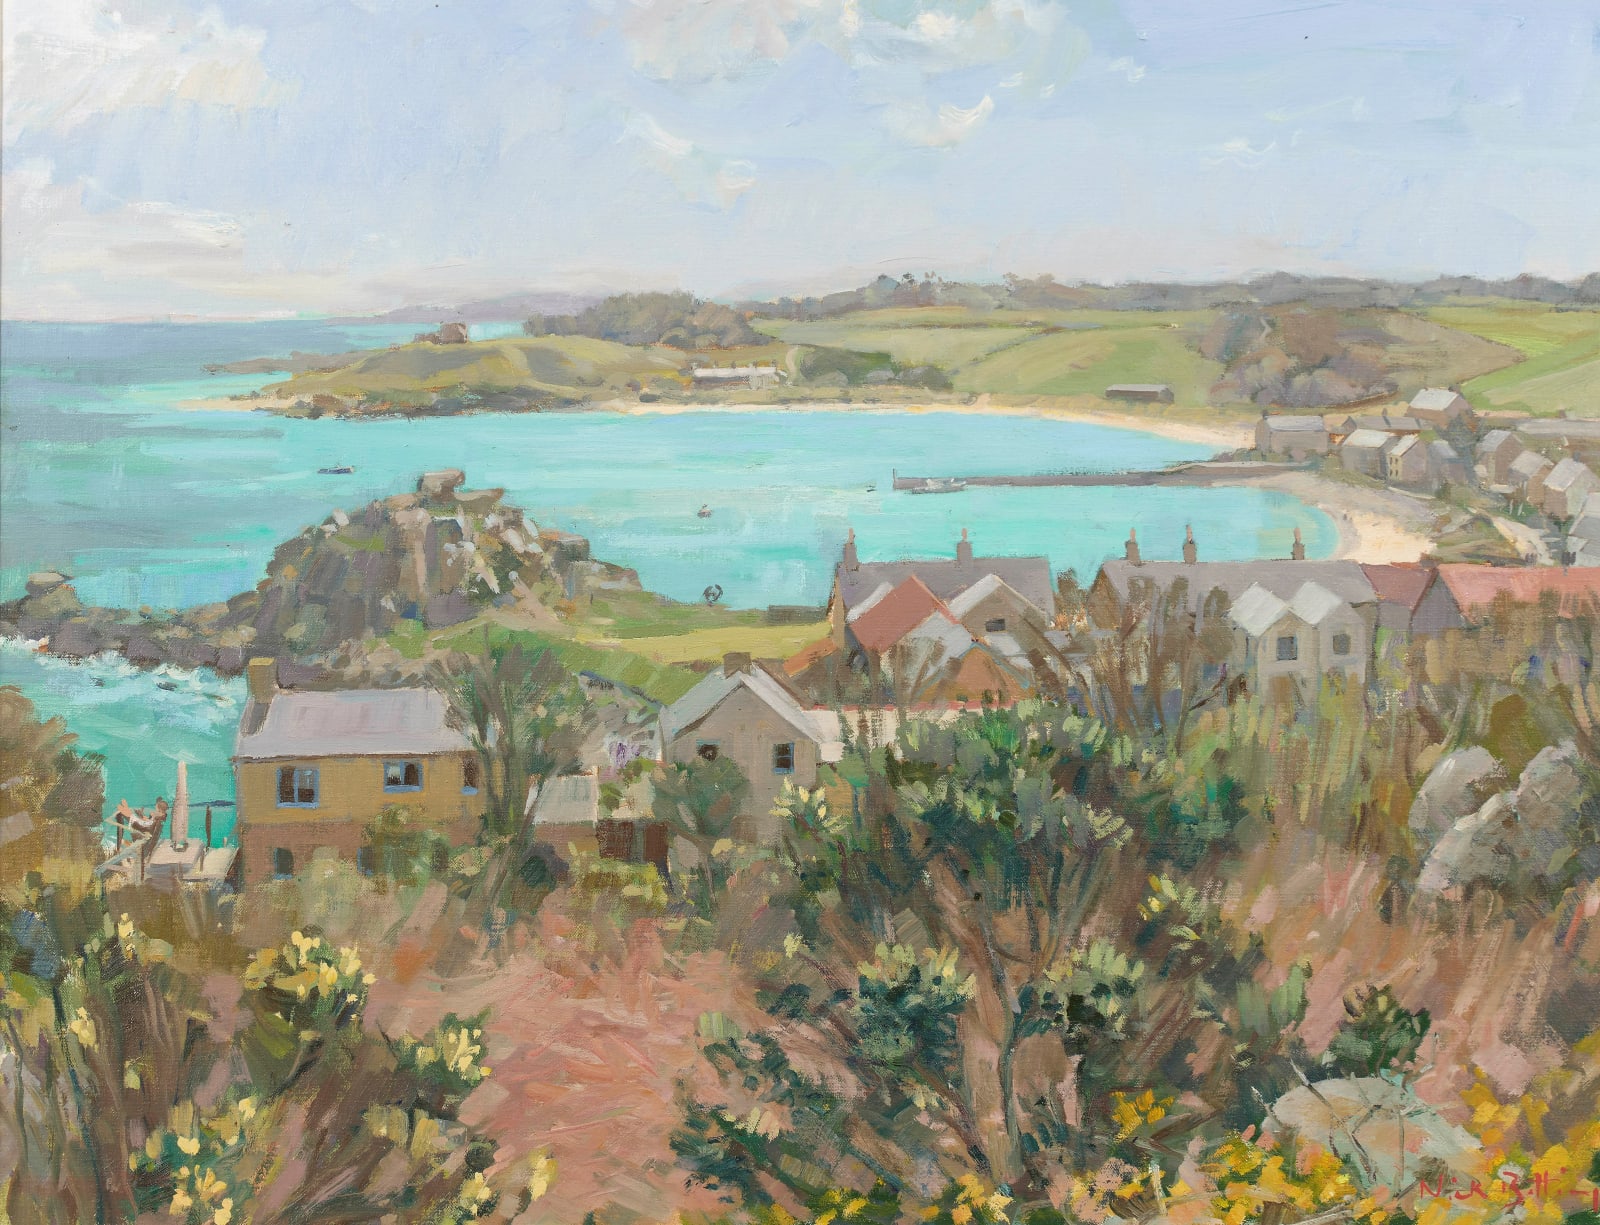 Nick Botting, Tresco, Old Grimsby from Above